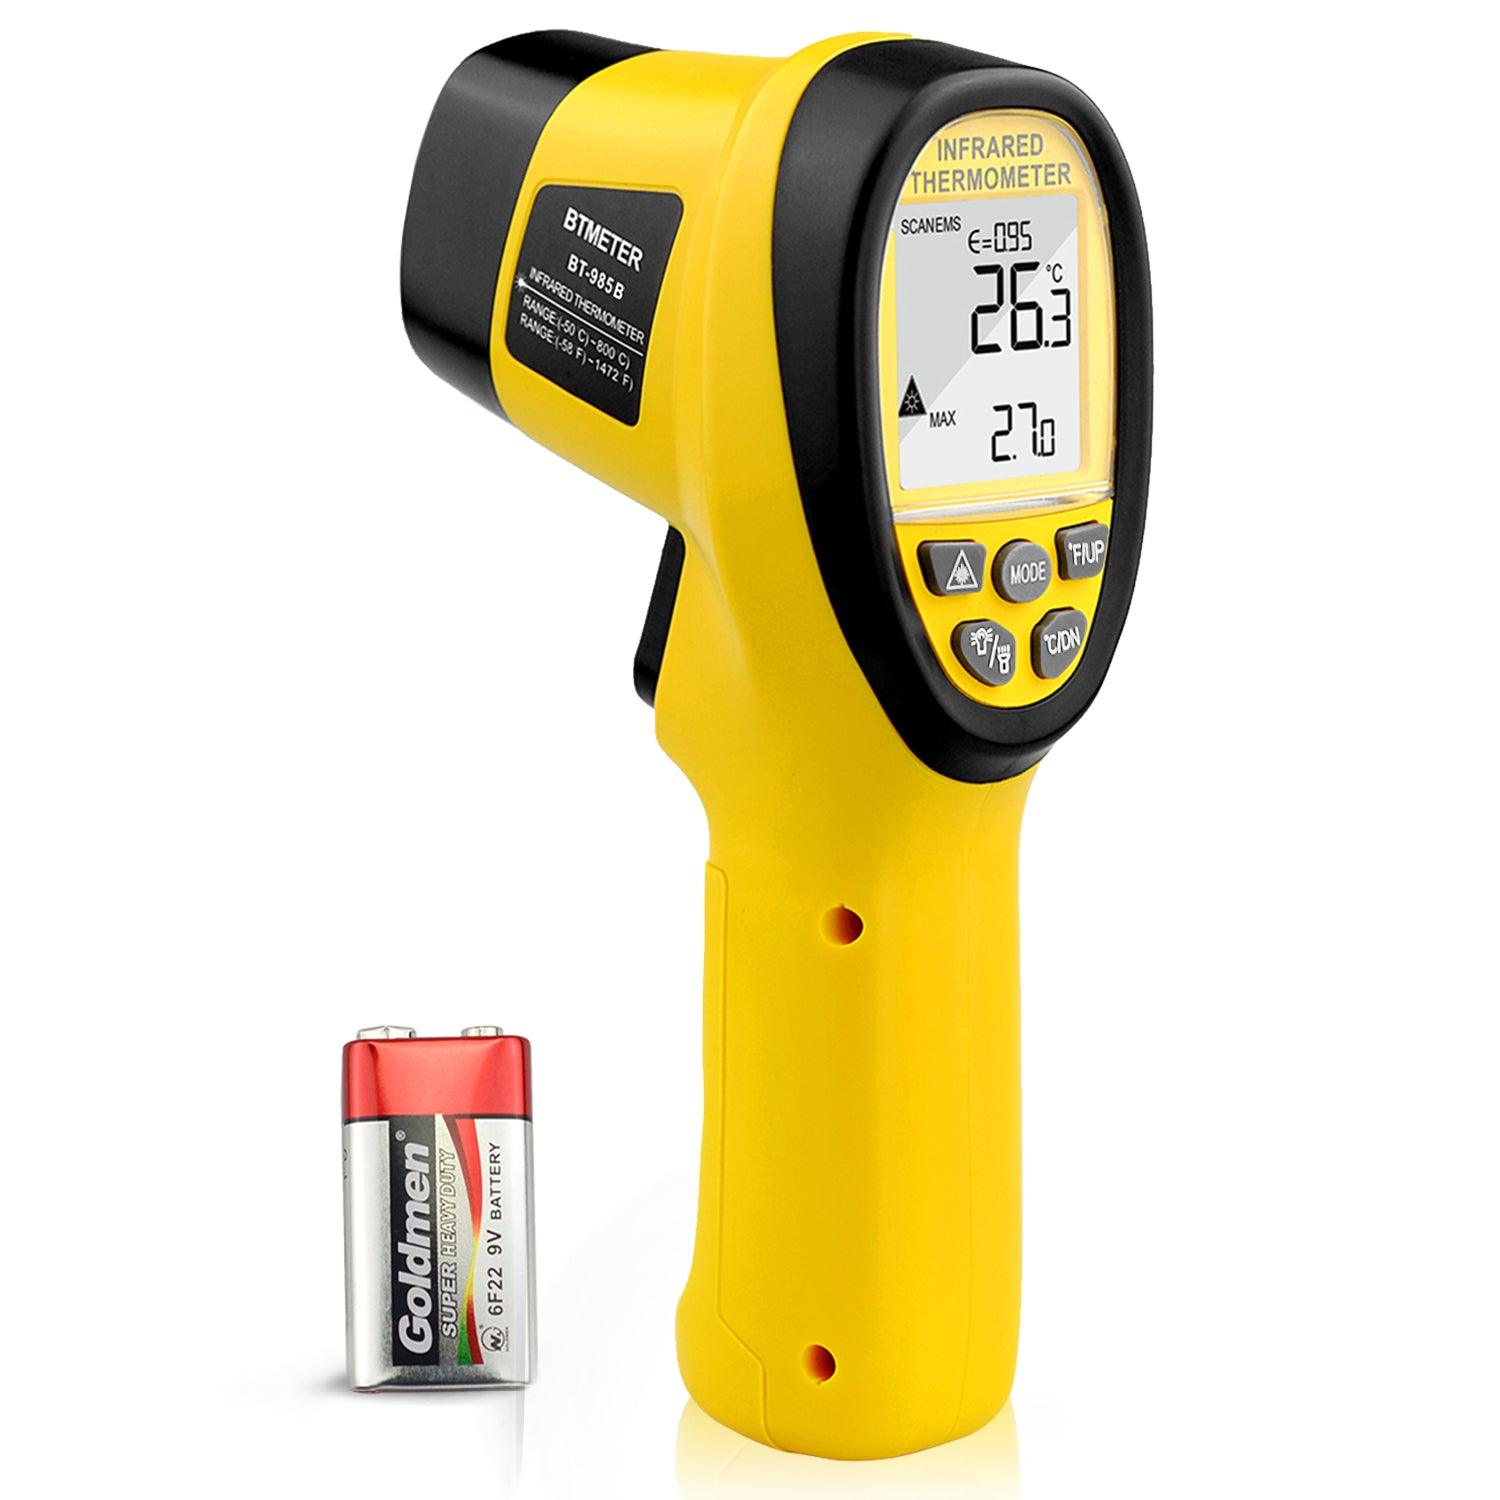 Dual Laser Targeting Infrared Thermometer